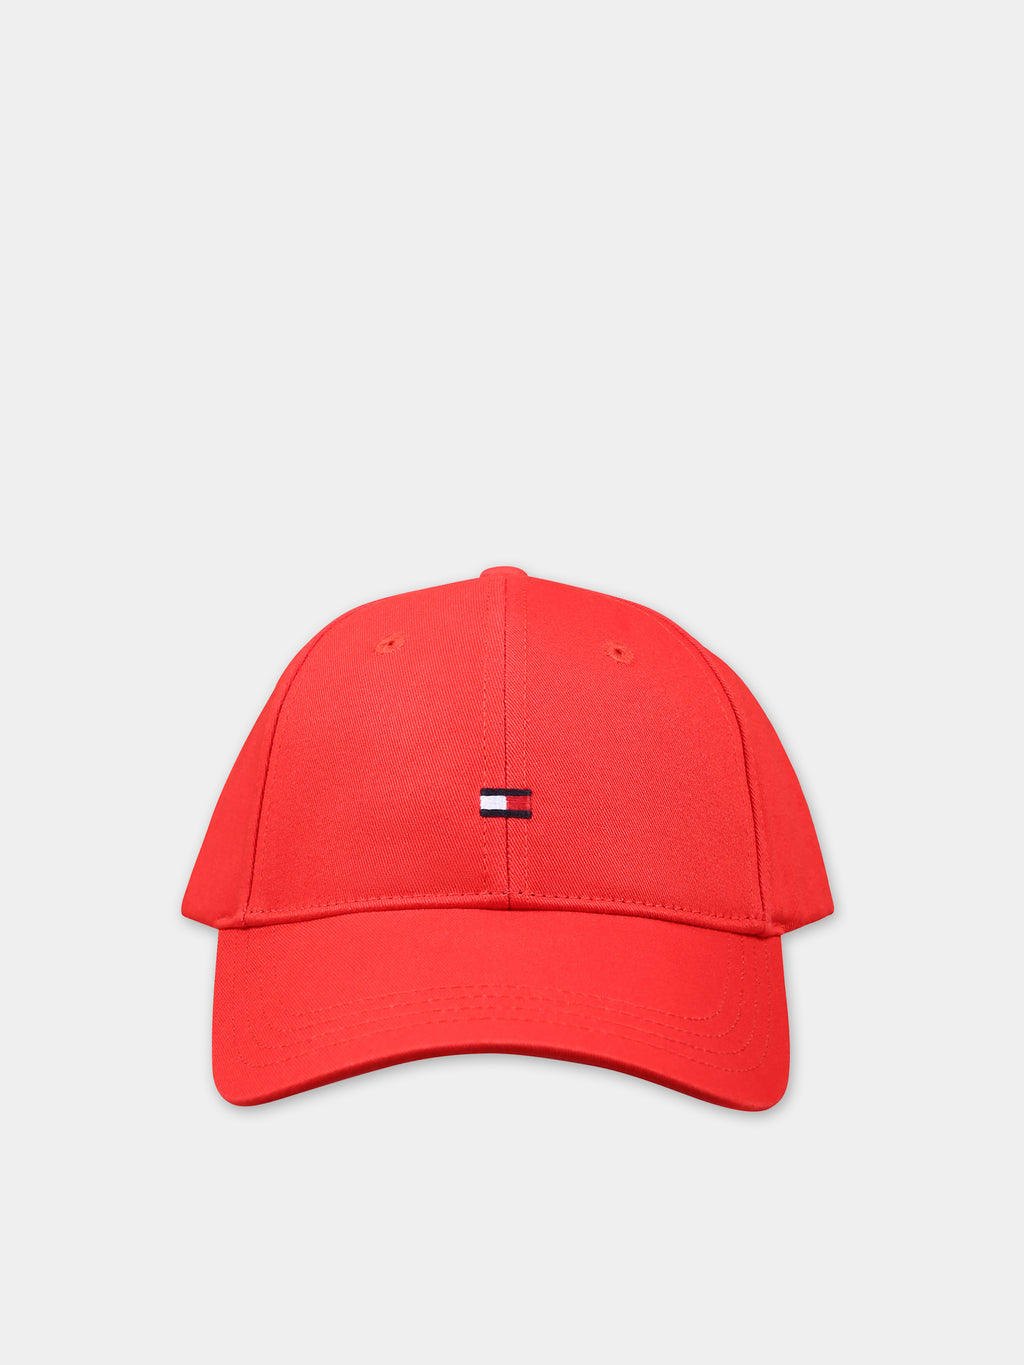 Red hat for kids with logo